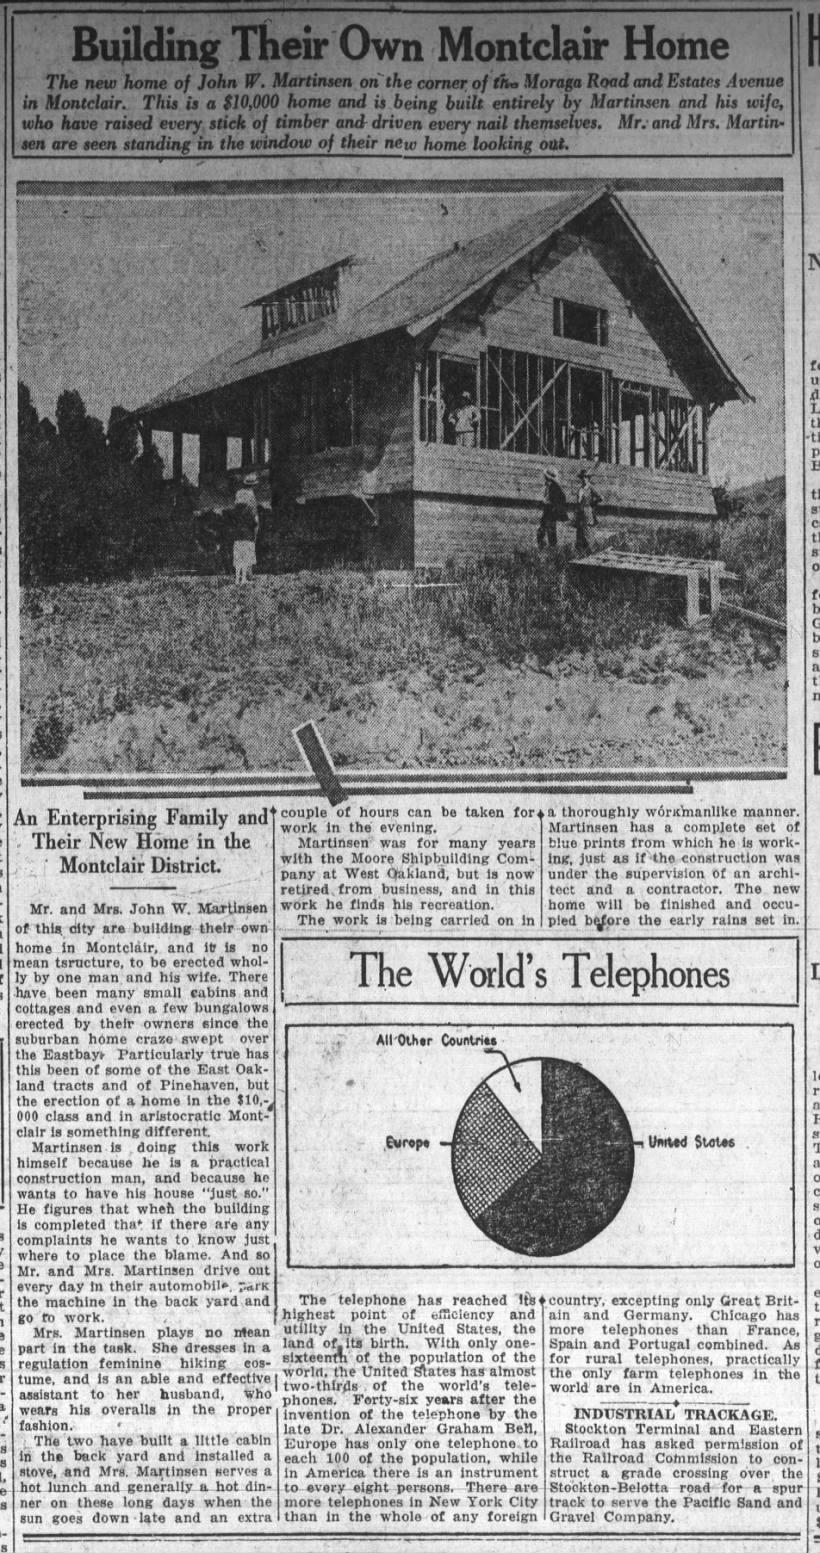 Building Their Own Montclair Home - Oct 22, 1922